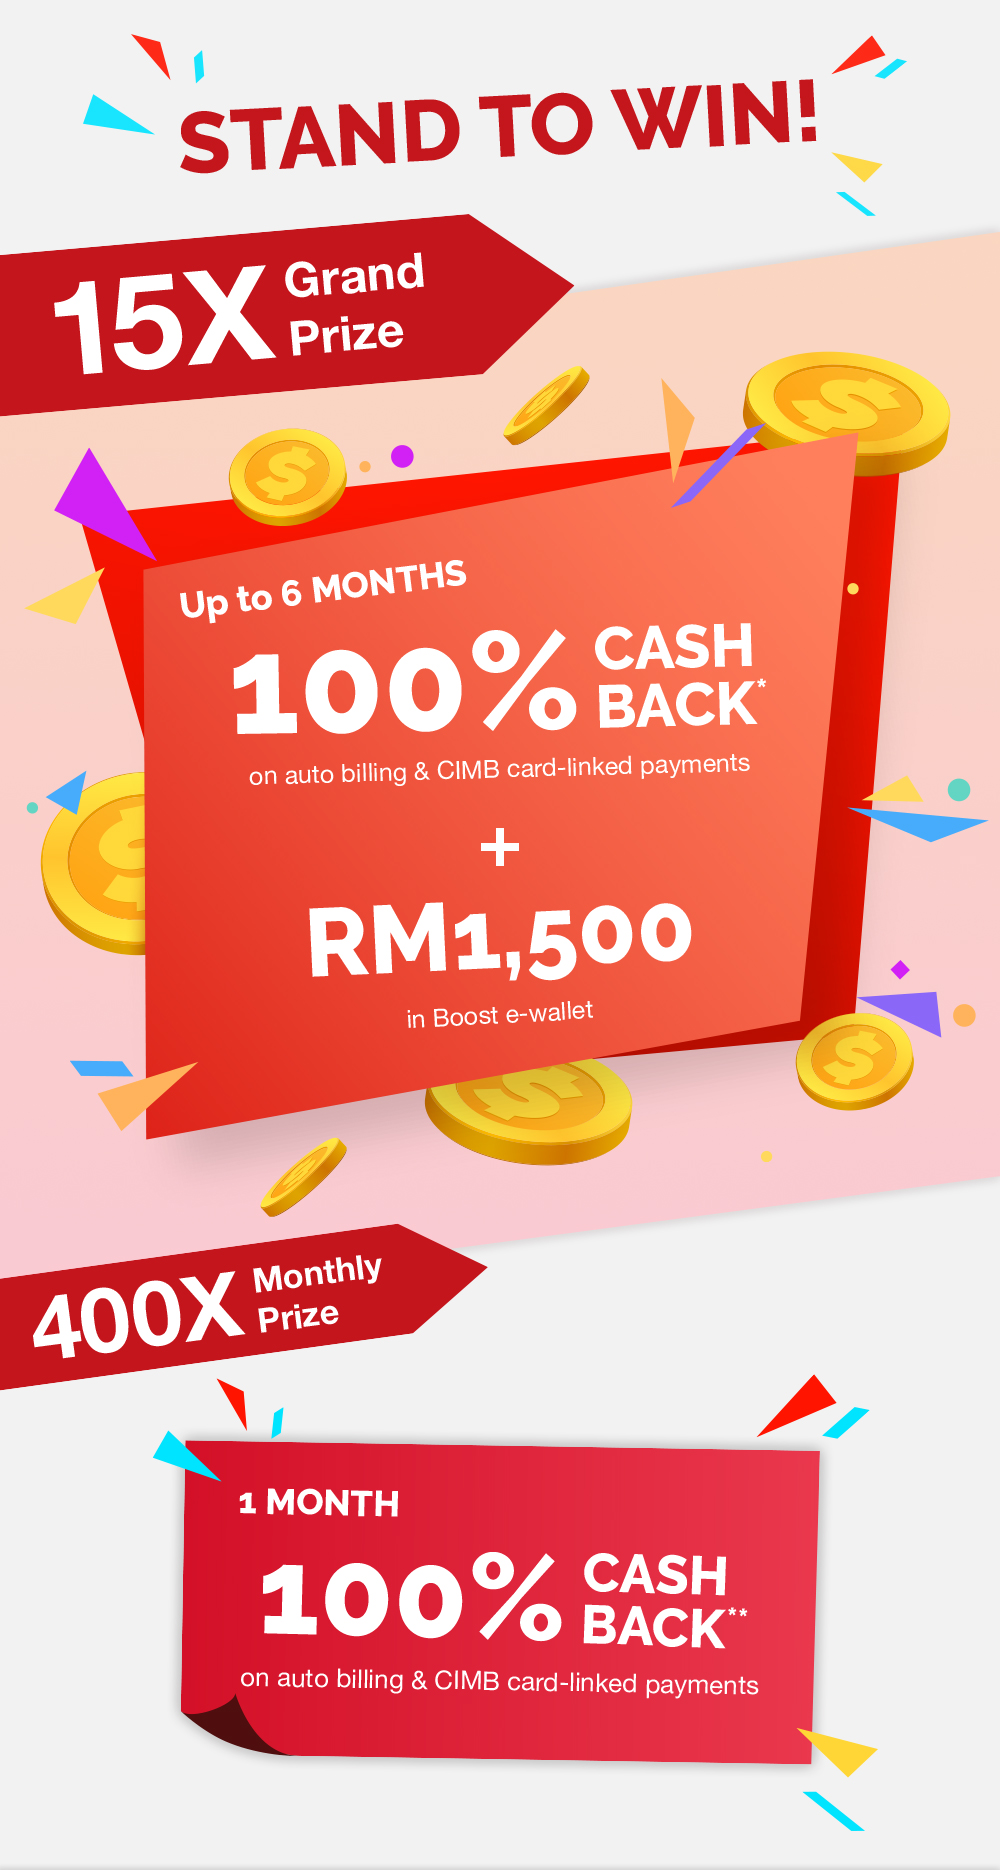 cimb-cards-campaign-best-credit-co-malaysia